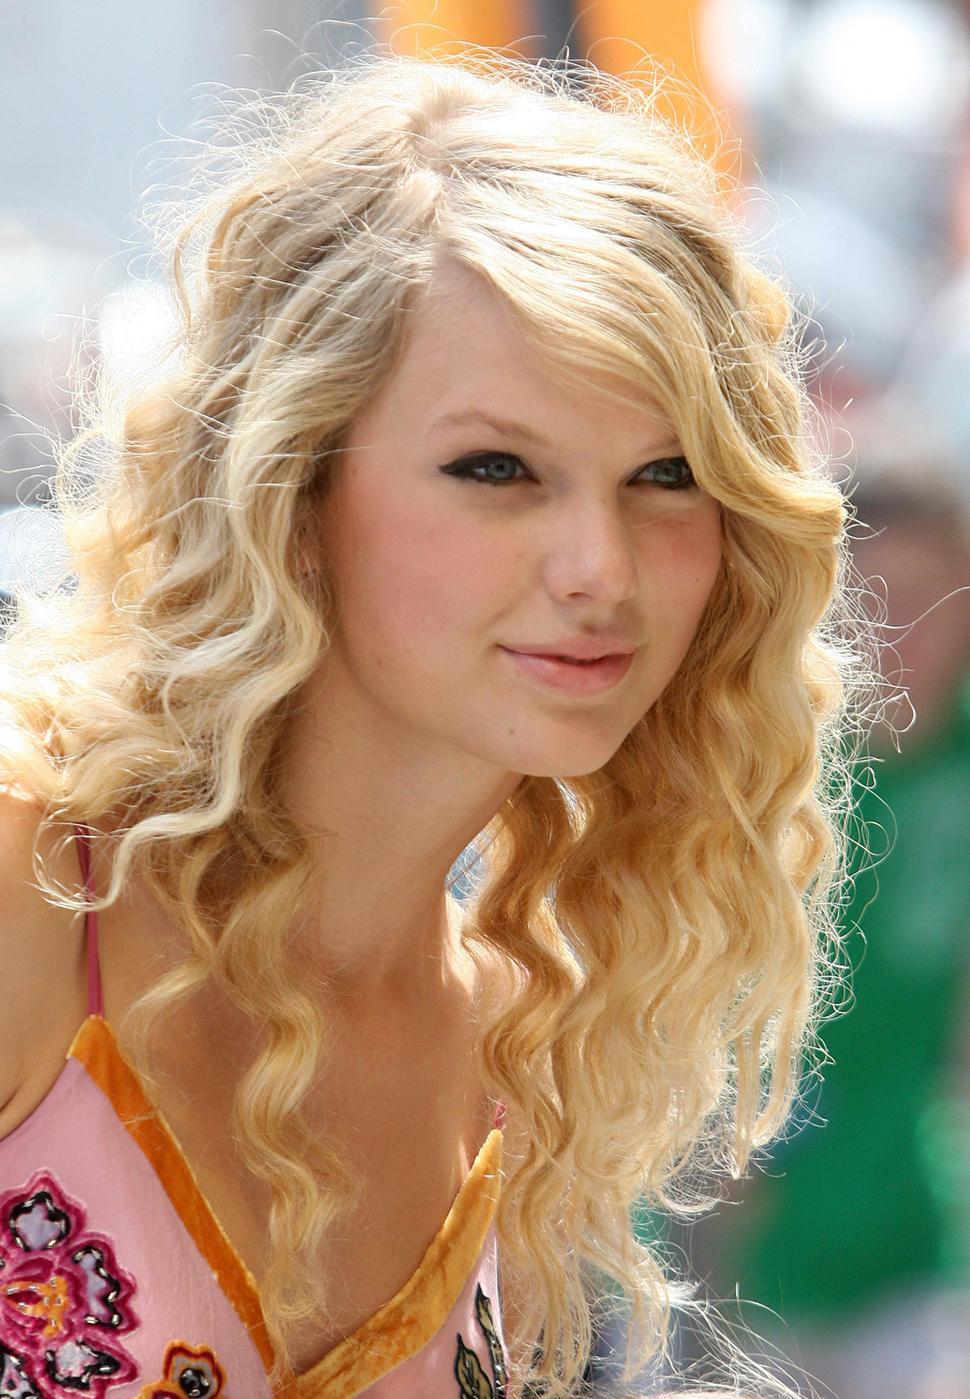 Celebrity Taylor Swift Curly Blonde Hairstyle Wallpapers